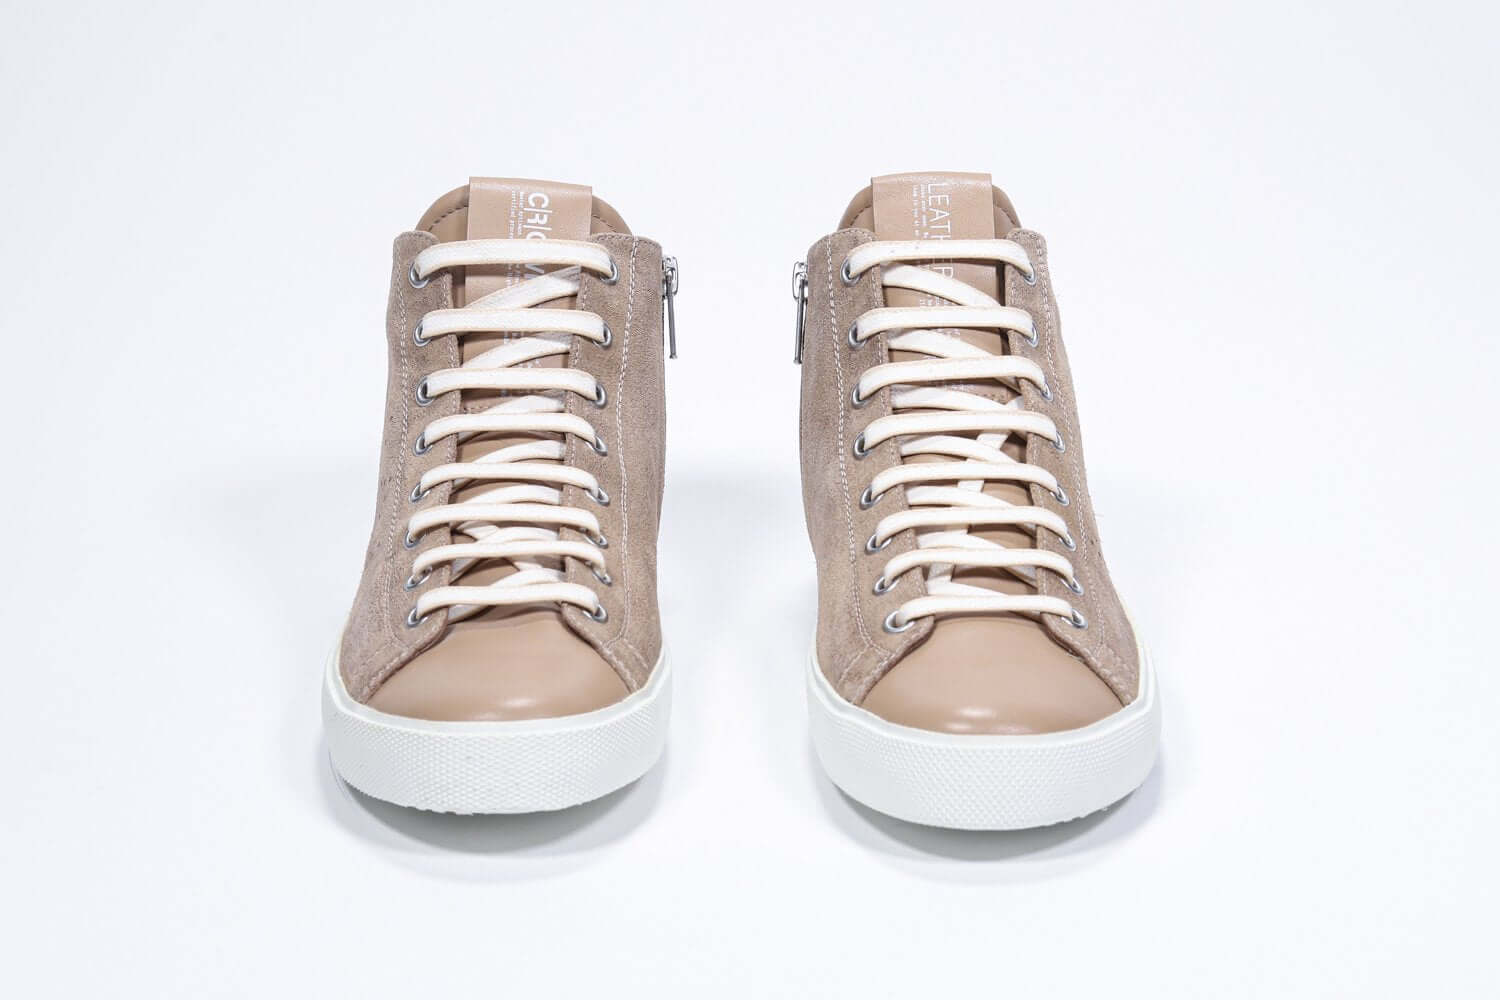 Front view of mid top cuoio sneaker with full suede upper with perforated crown logo, internal zip and white sole.